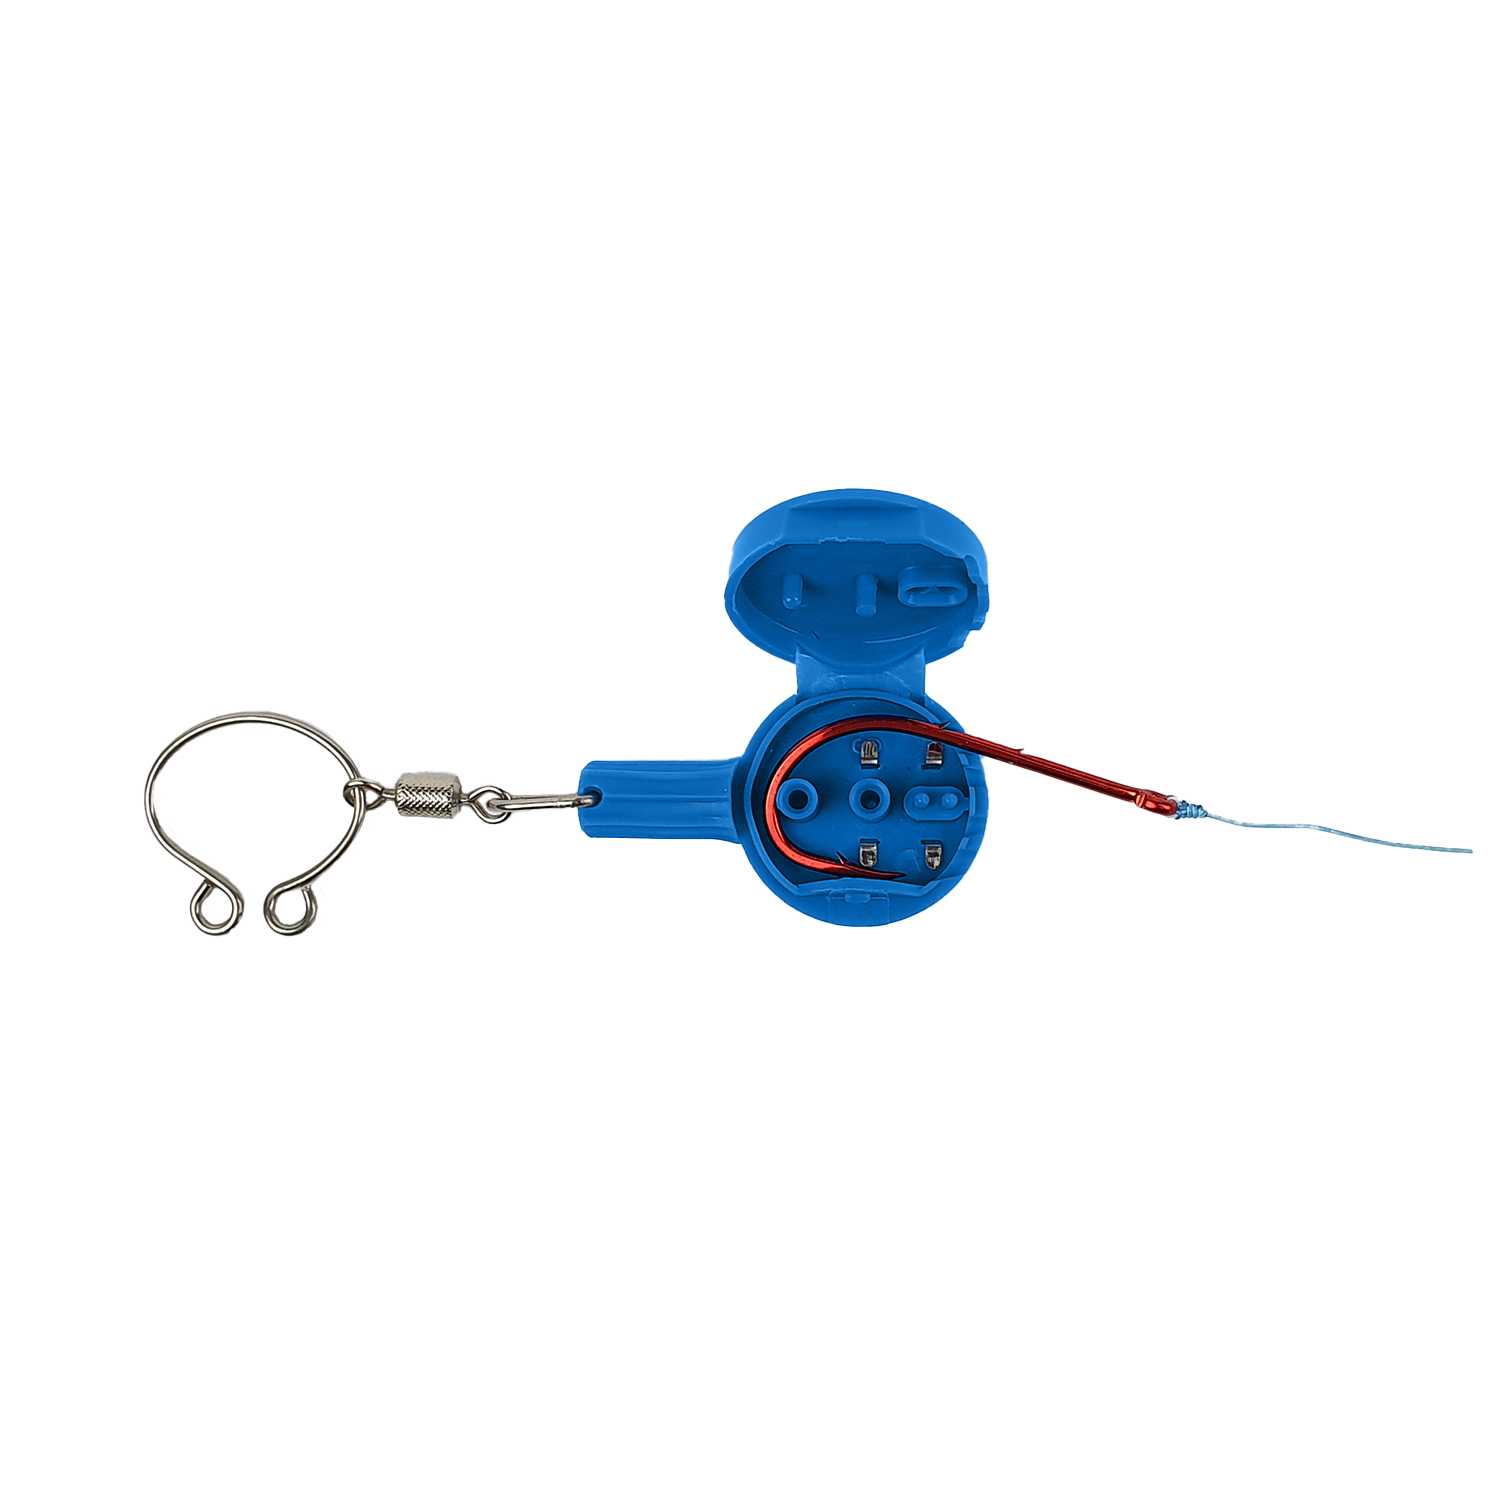  HOOK-EZE Fishing Knot Tying Tool - Fishing Accessories for  tieing Fishing line to Fishing Hooks - Cover Sharp Hooks Fishing Equipment  to tie Knots Quick - for Fly Fishing Accessories 